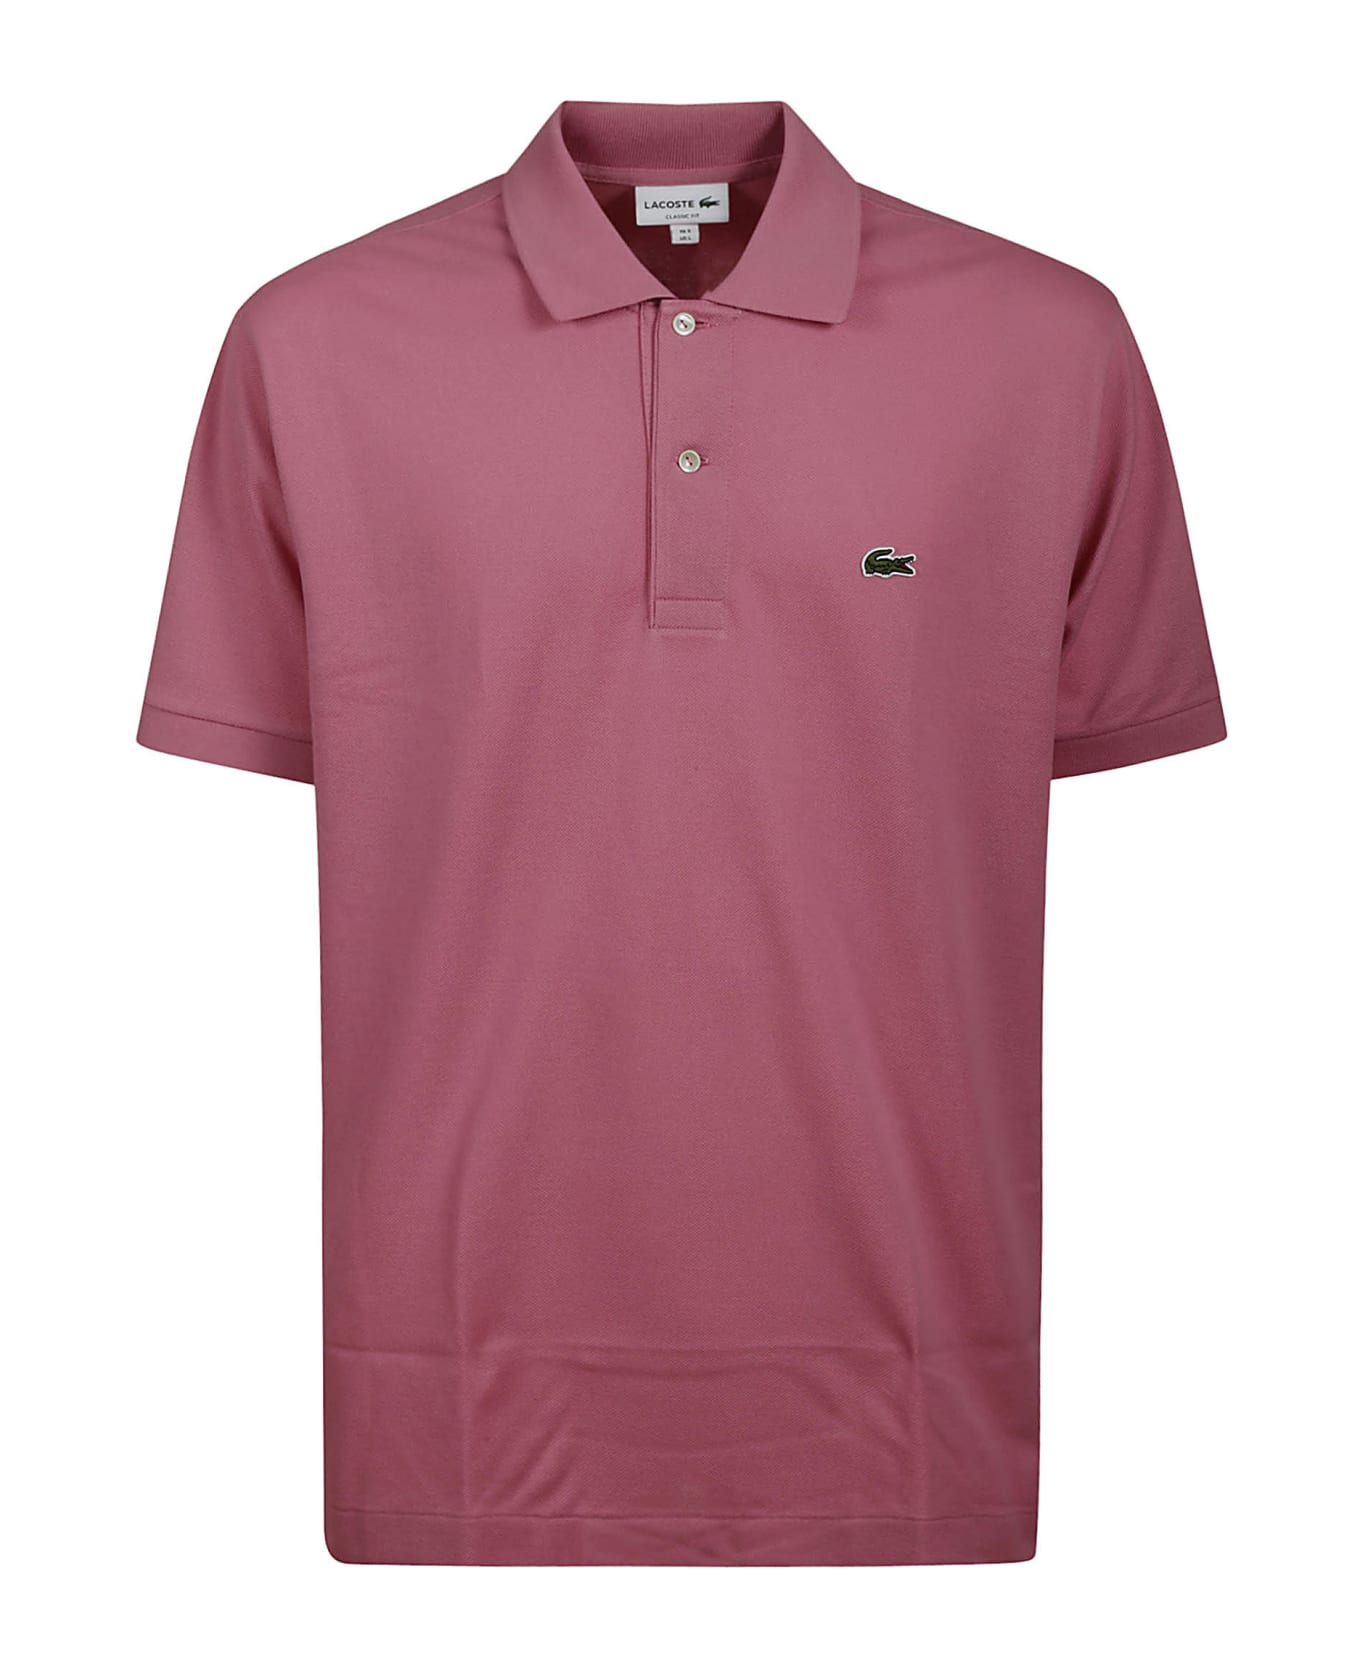 Lacoste Polo Ss - Reseda Pink